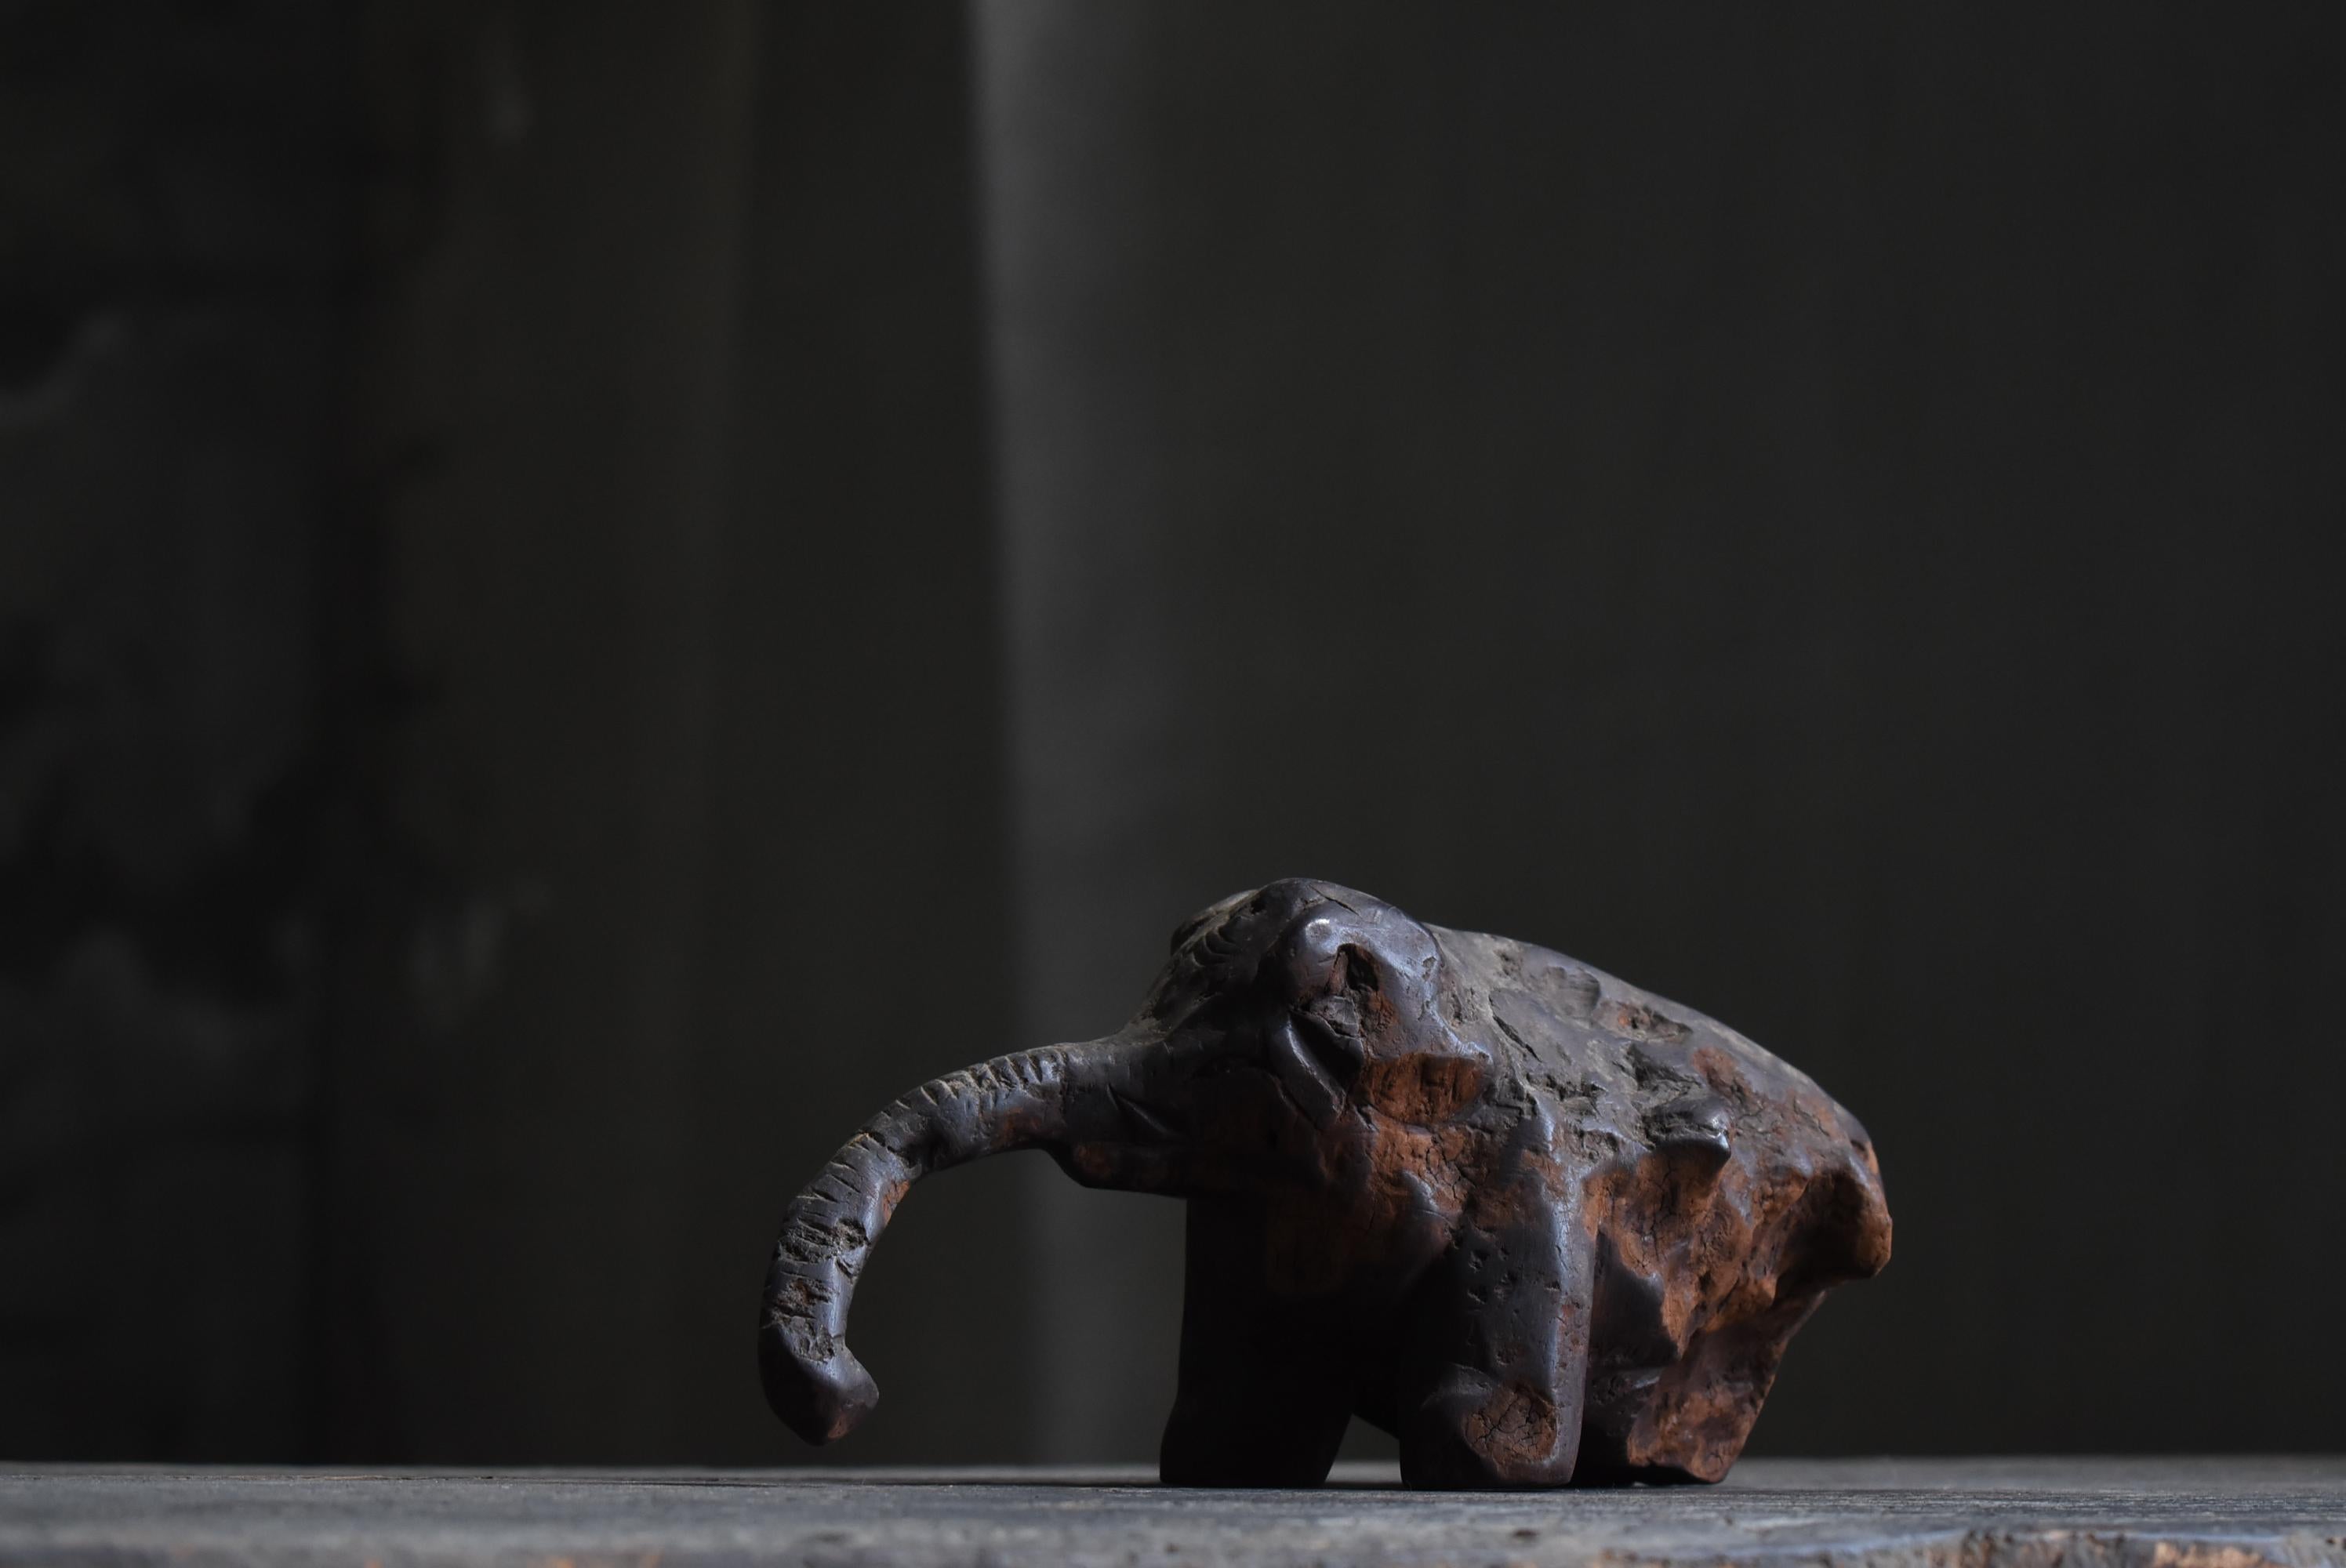 This is a very old Japanese elephant wood carving.
This wood carving dates from the Meiji period (1860s-1920s).
We estimate the material to be cedar wood.

The carving is rough and rugged, but that is what makes it so unique.
It is thought to